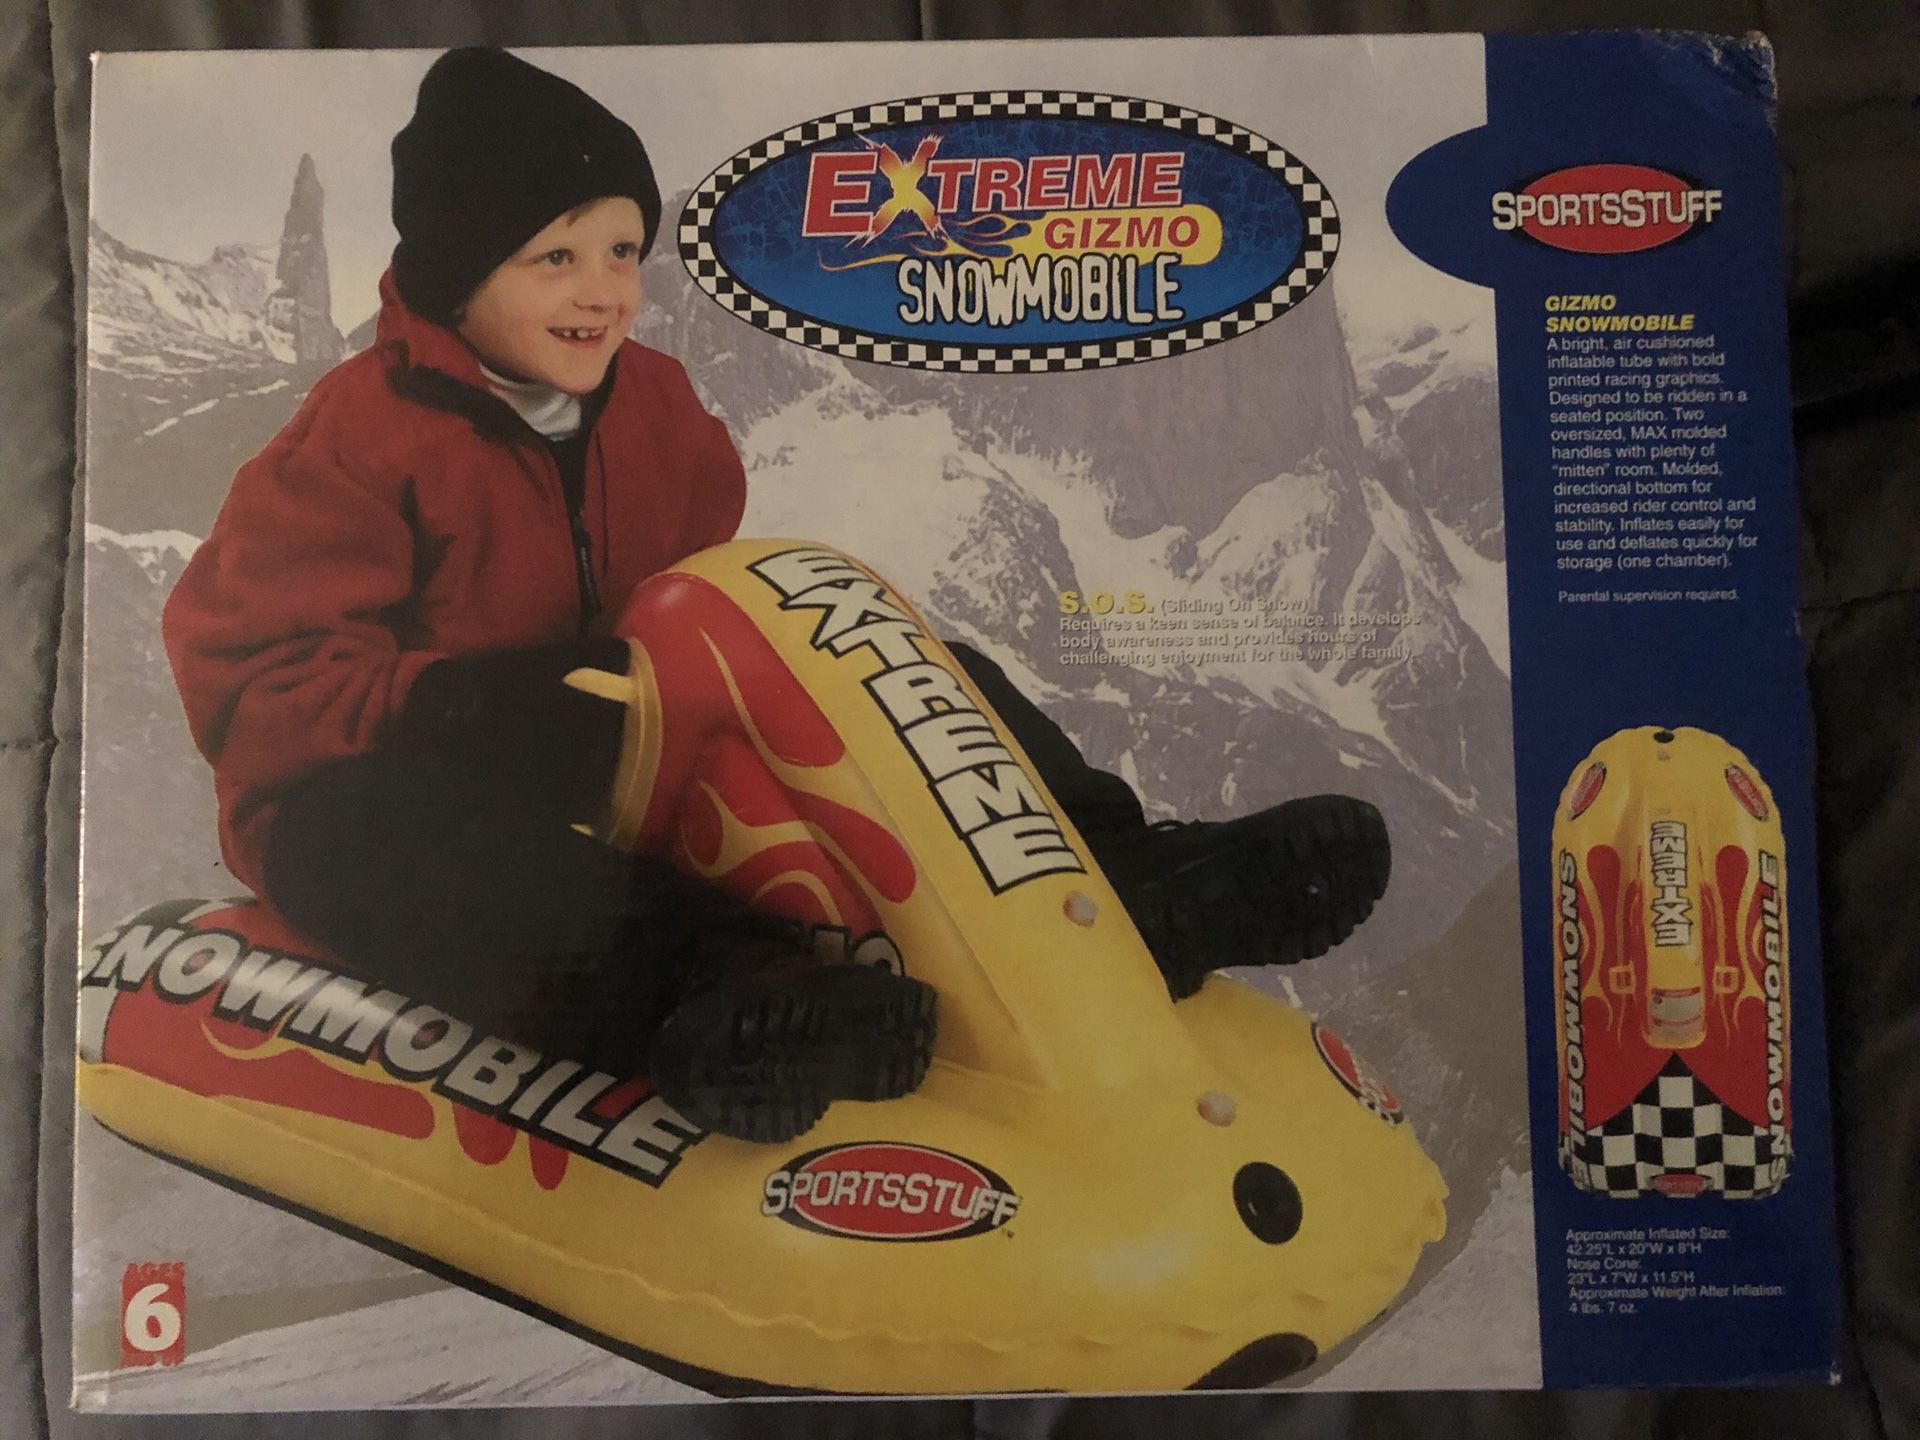 2 inflatable sleds